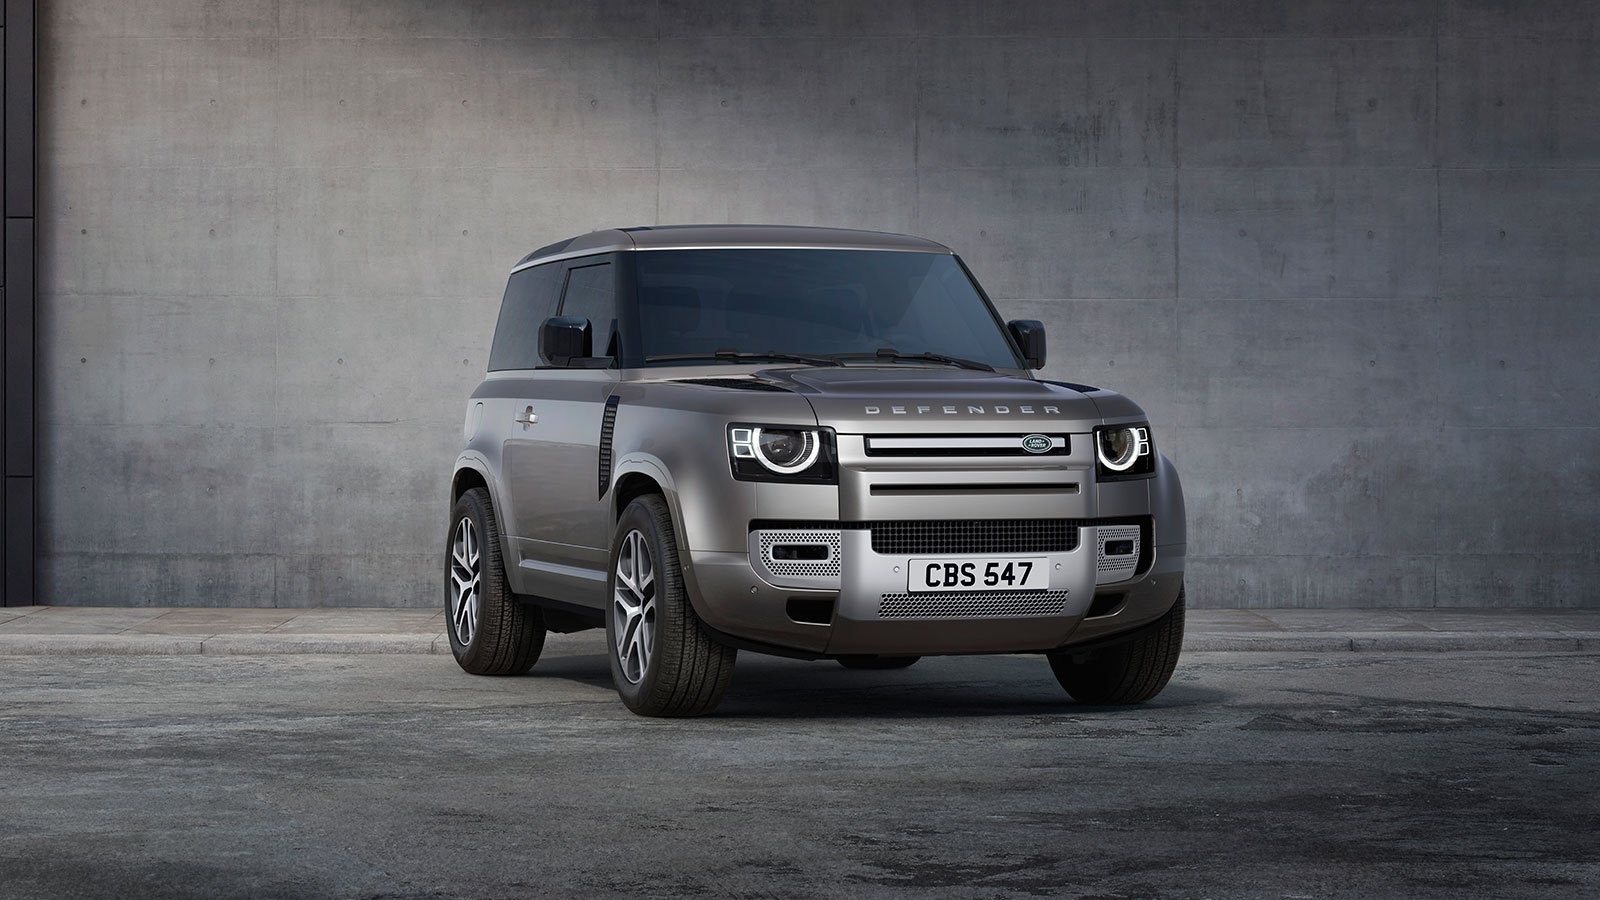 What's new with the Land Rover Defender?